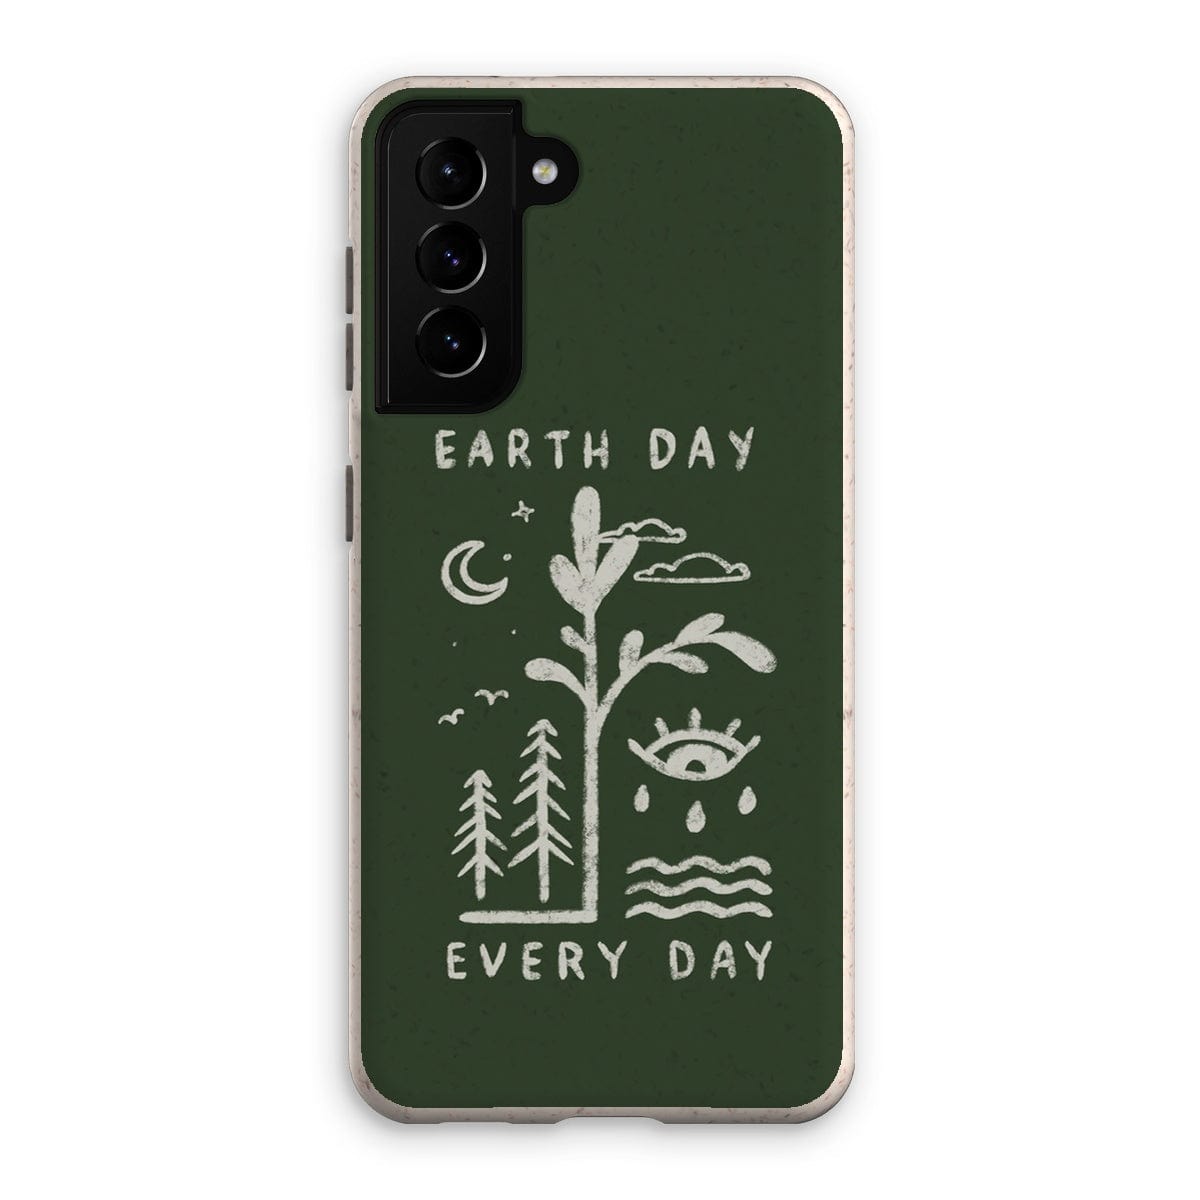 Prodigi Phone & Tablet Cases Samsung Galaxy S21 / Matte Earth Day Eco Phone Case